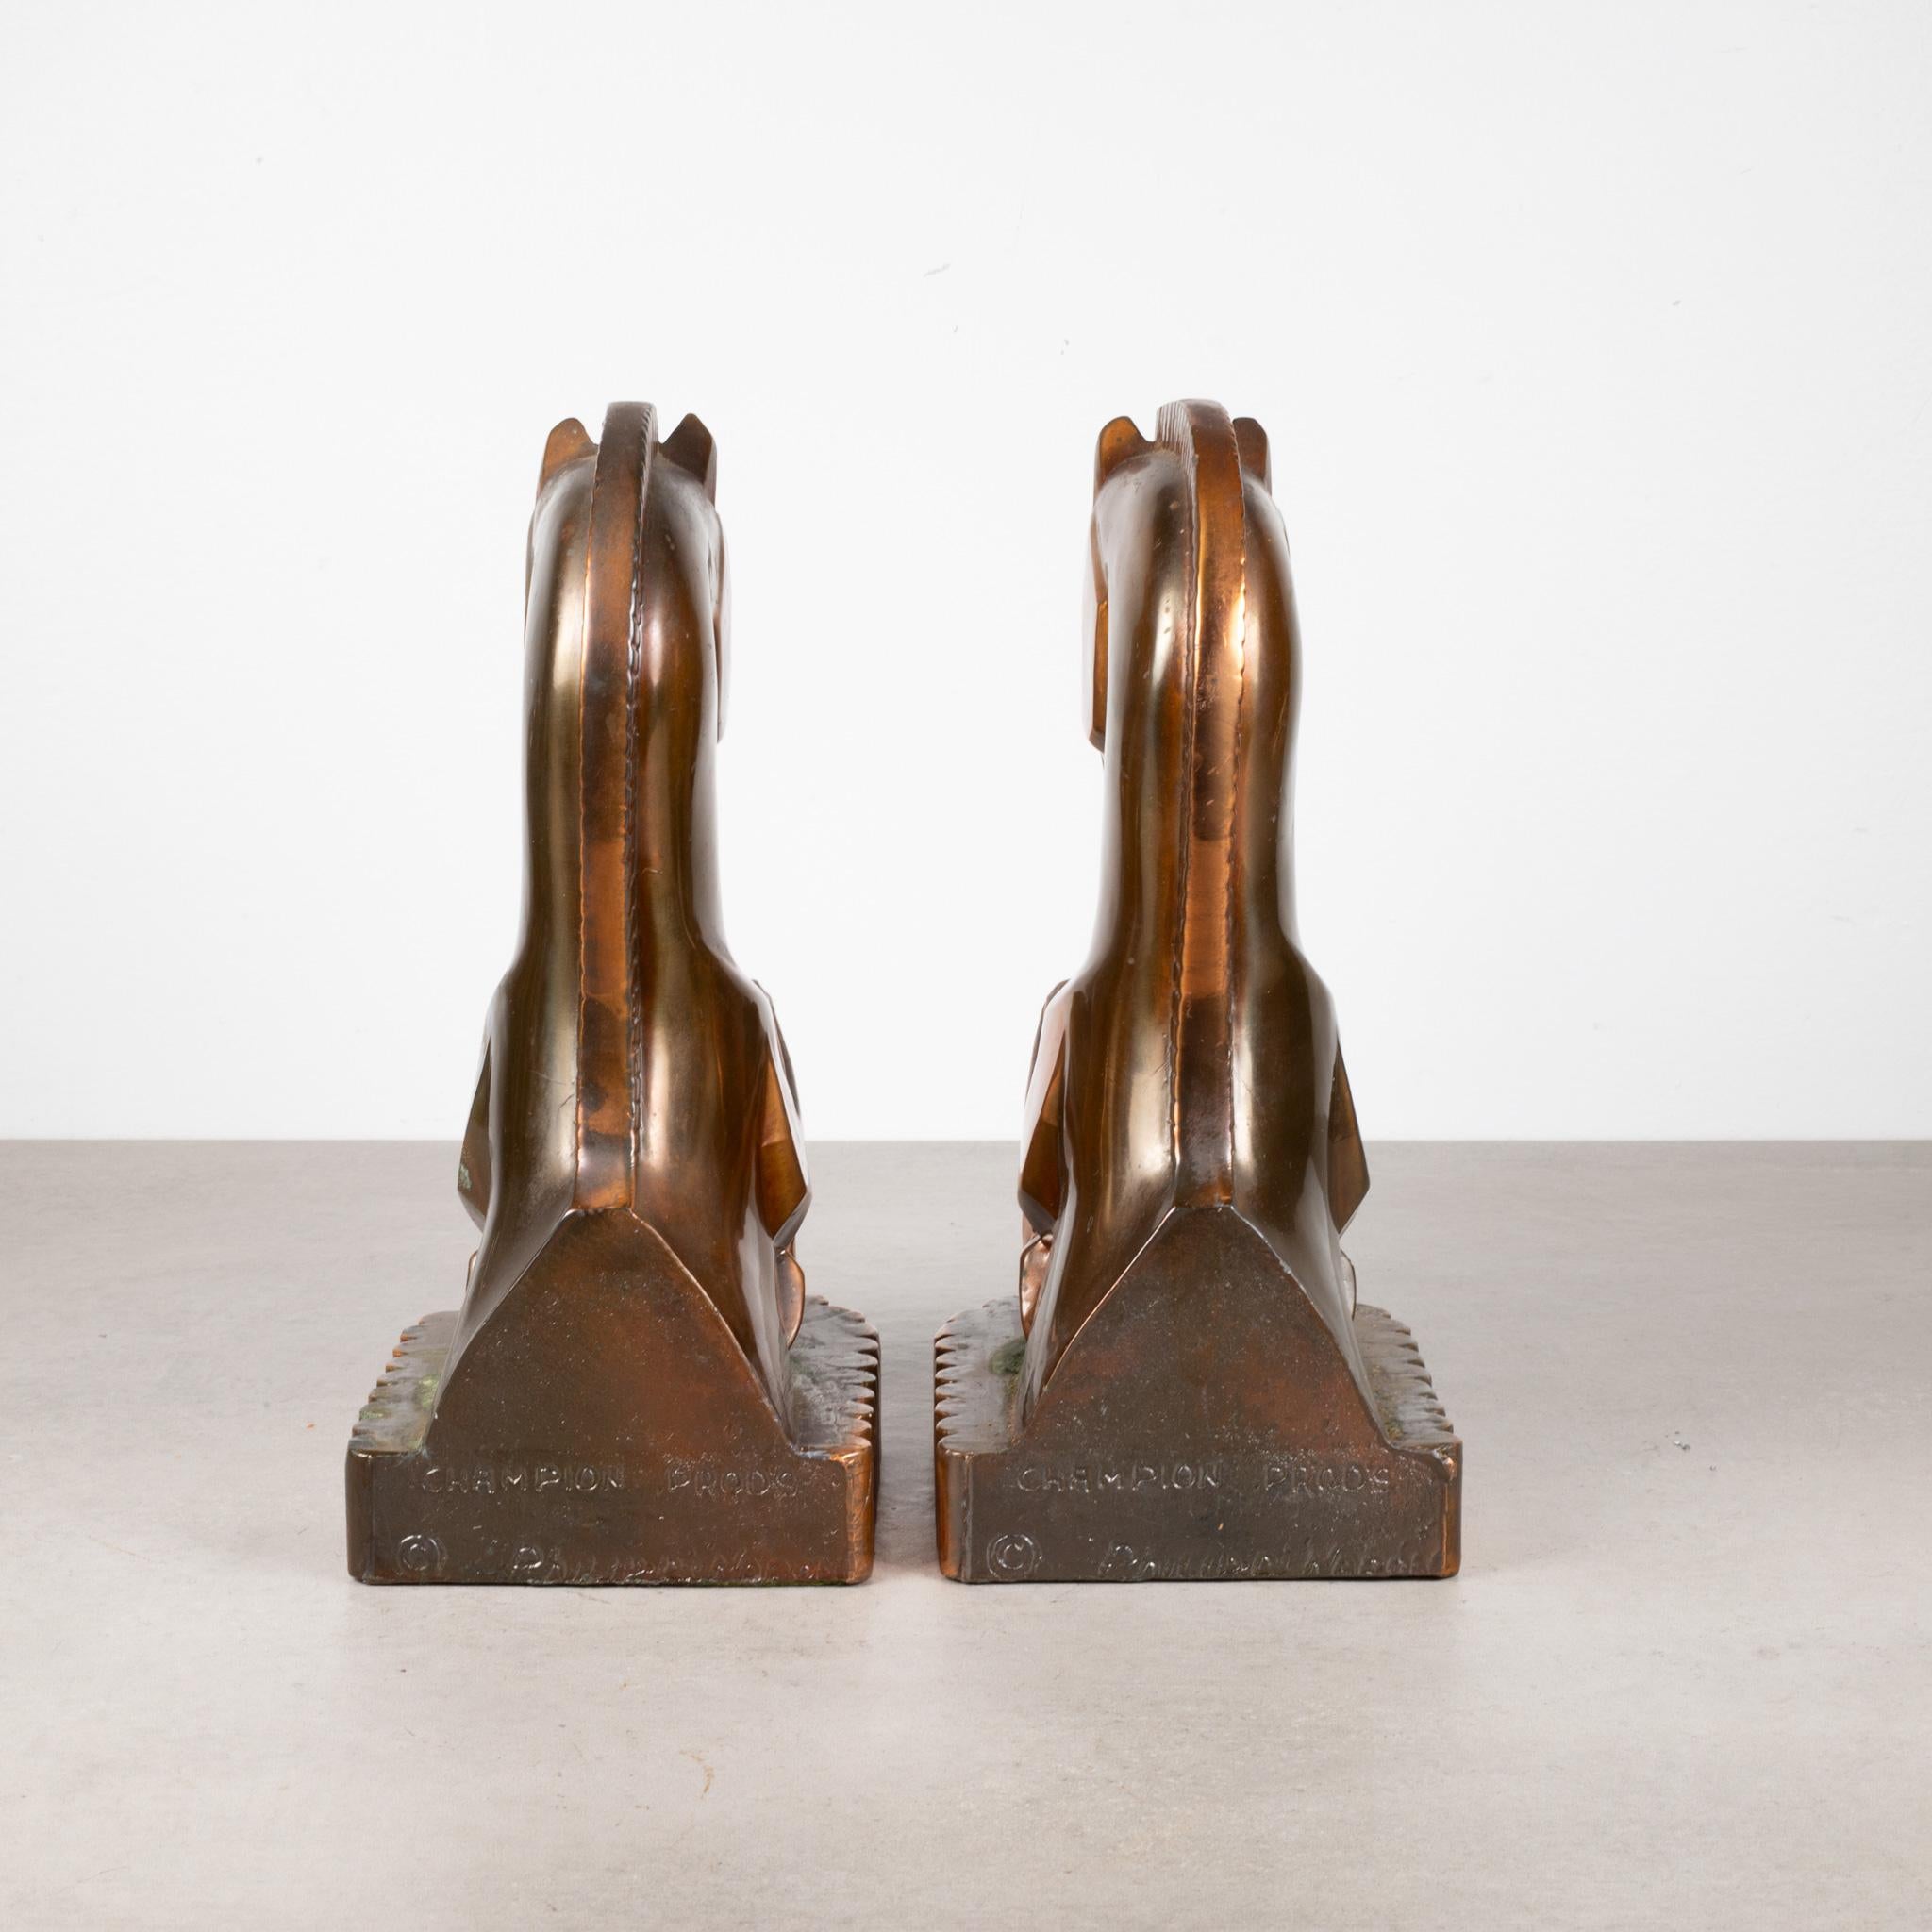 20th Century Oversize Art Deco Bronze Plated Trojan Horse Bookends, c.1930  (FREE SHIPPING) For Sale